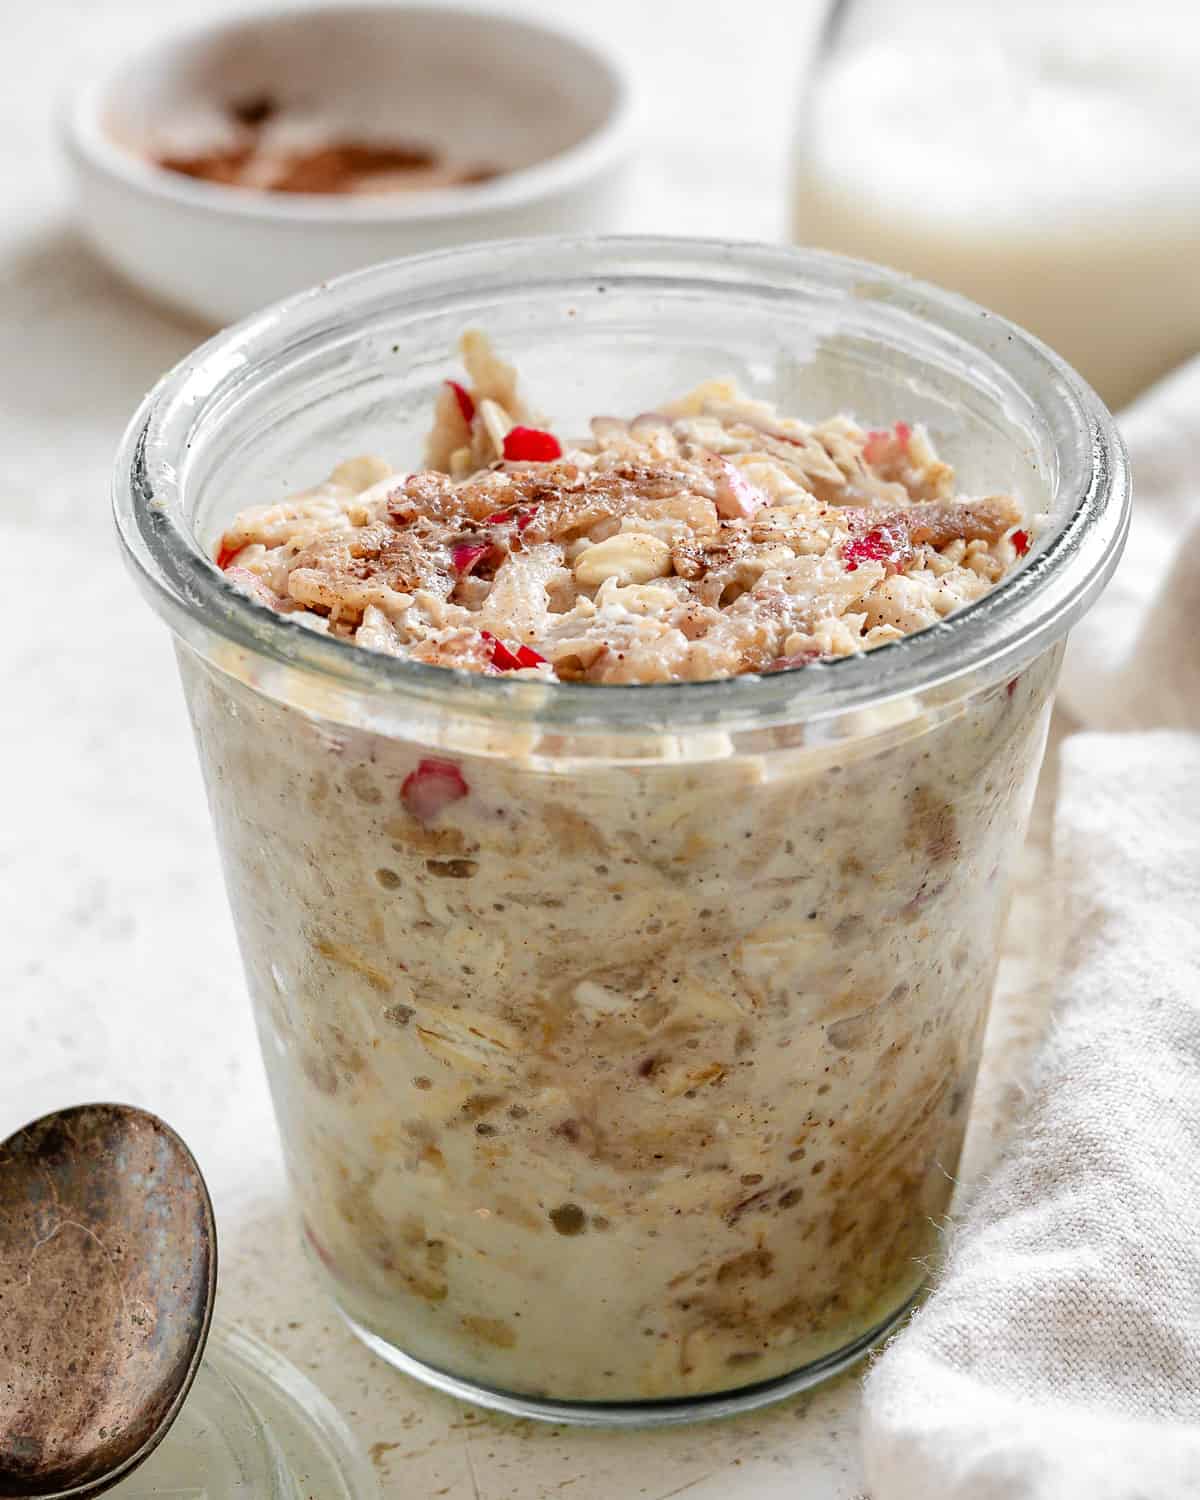 completed Apple Cinnamon Overnight Oats in a gl، cup